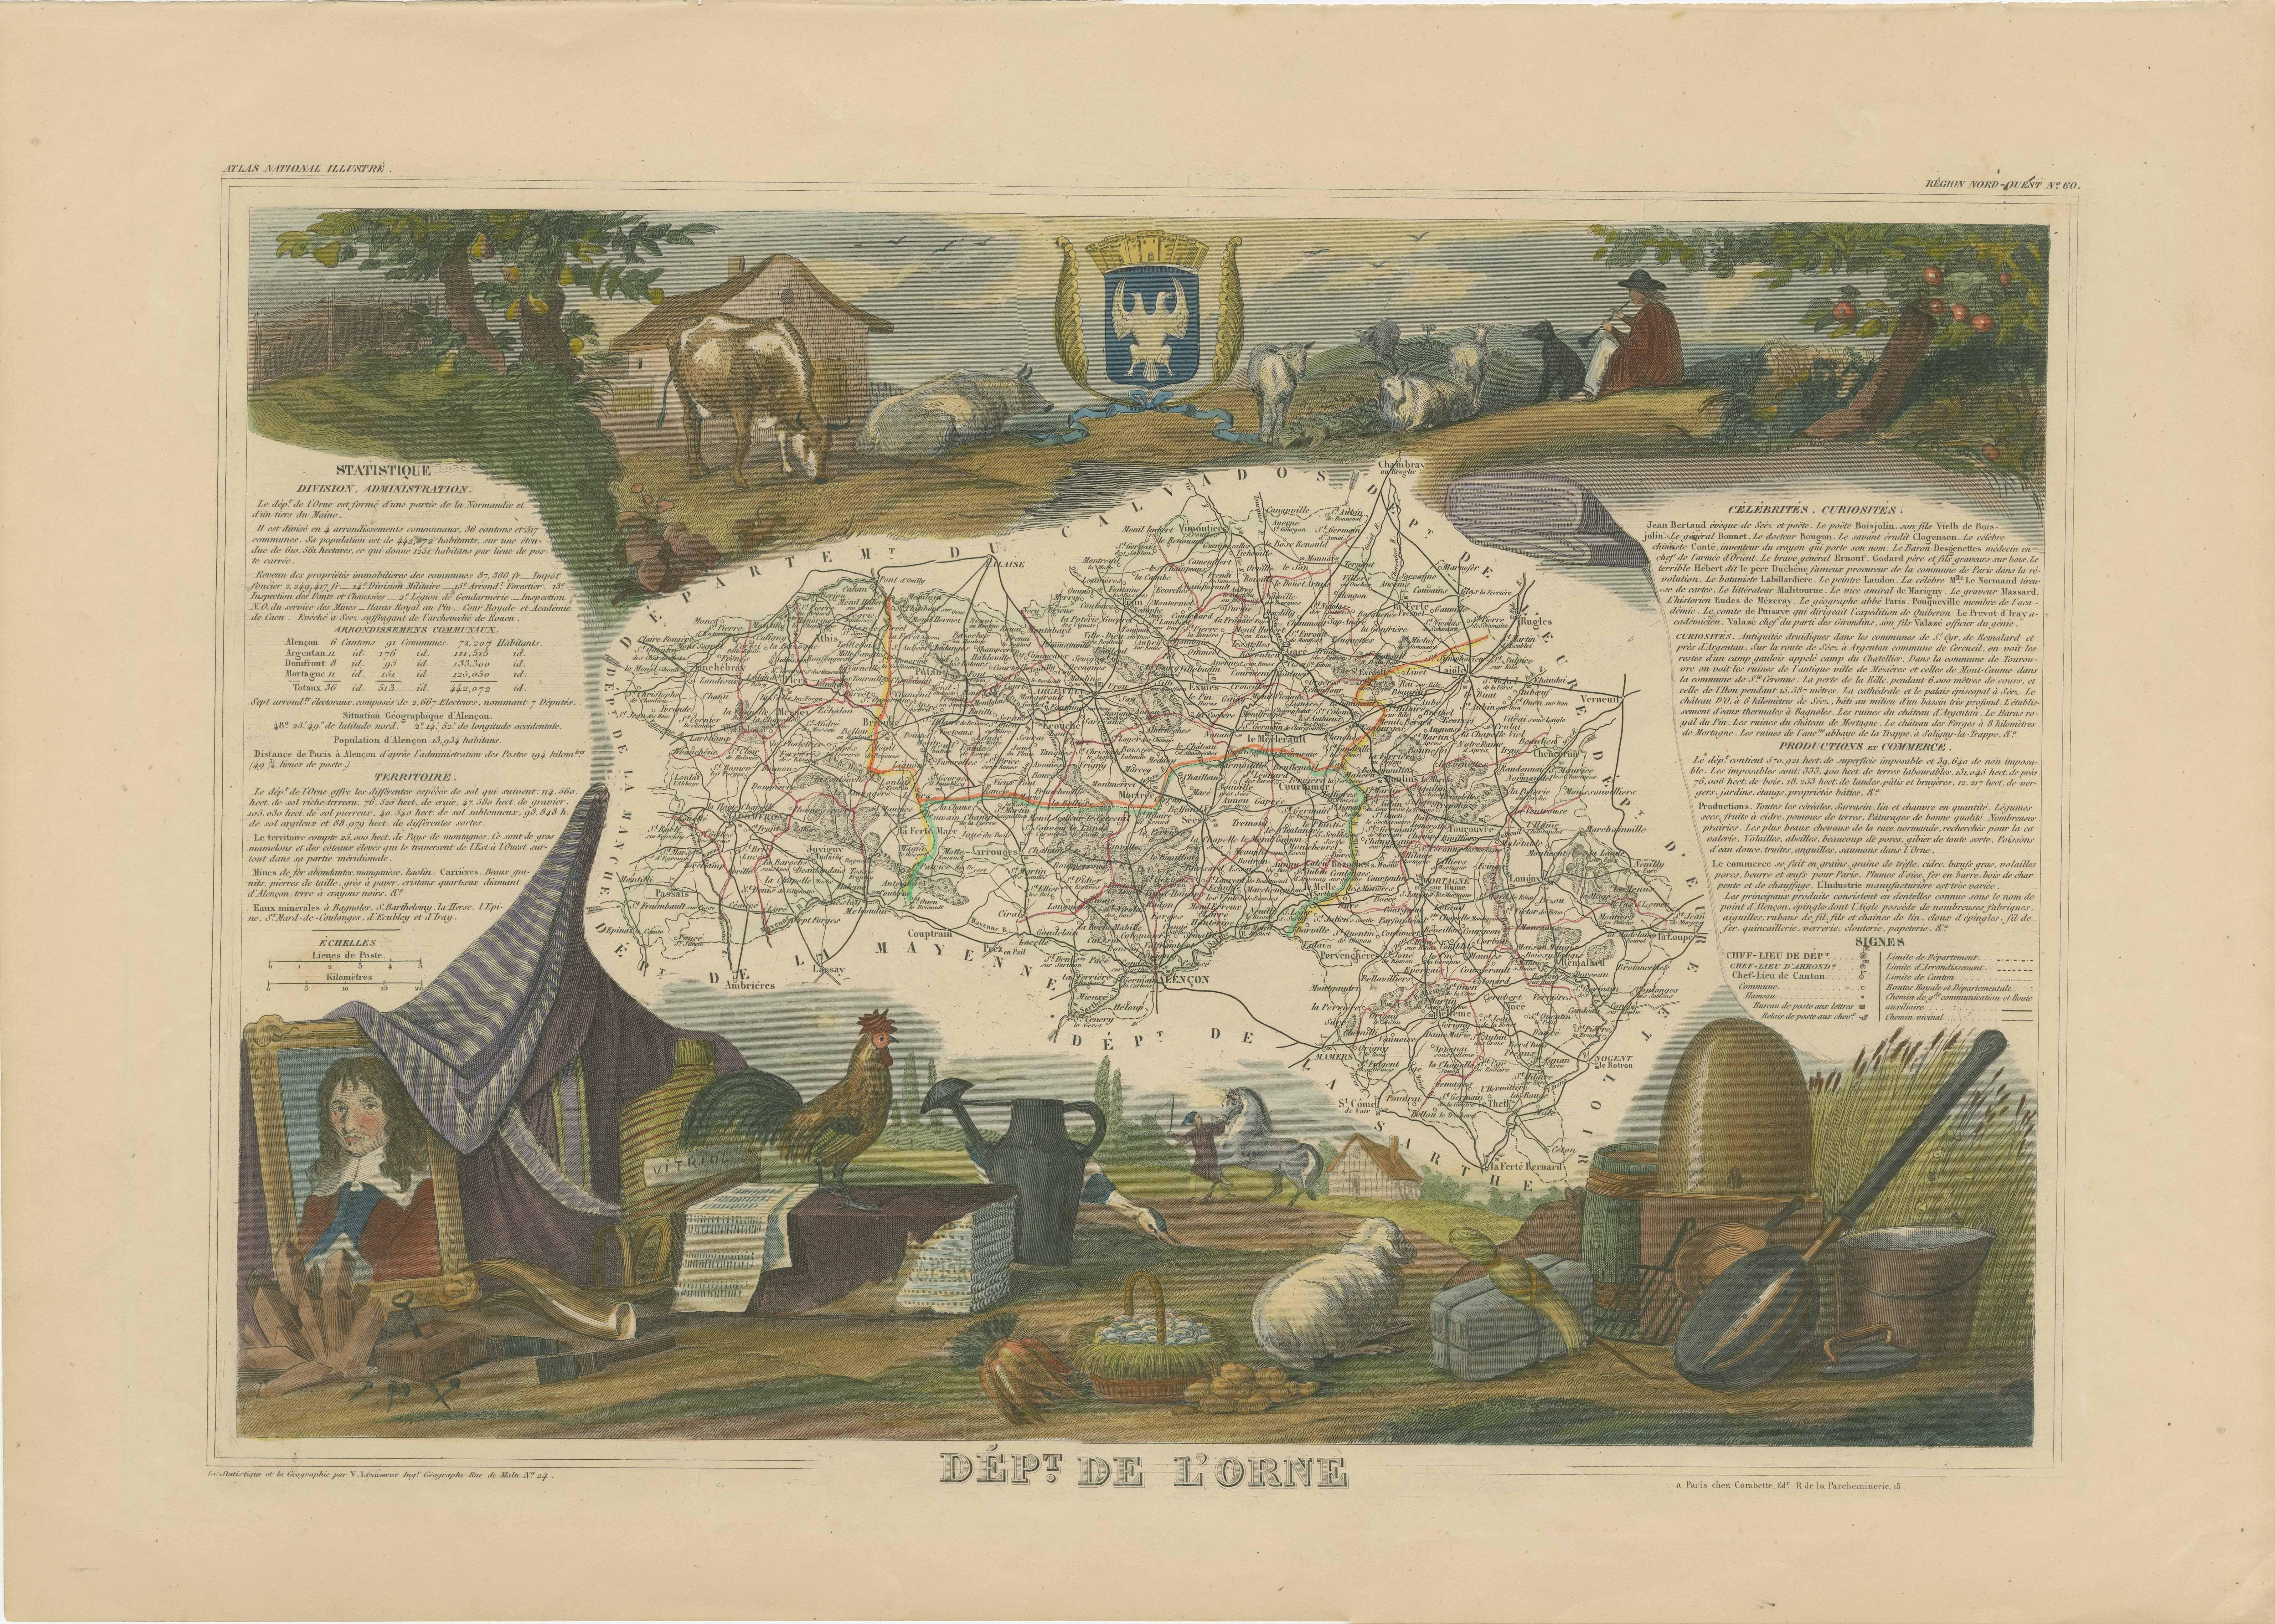 Antique map titled 'Dépt. de l'Orne'. Map of the French department of Orne, France. This area, part of Normandy, includes the village of Camembert, where the famous Camembert cheese was first developed. Camembert is a soft, creamy, surface-ripened